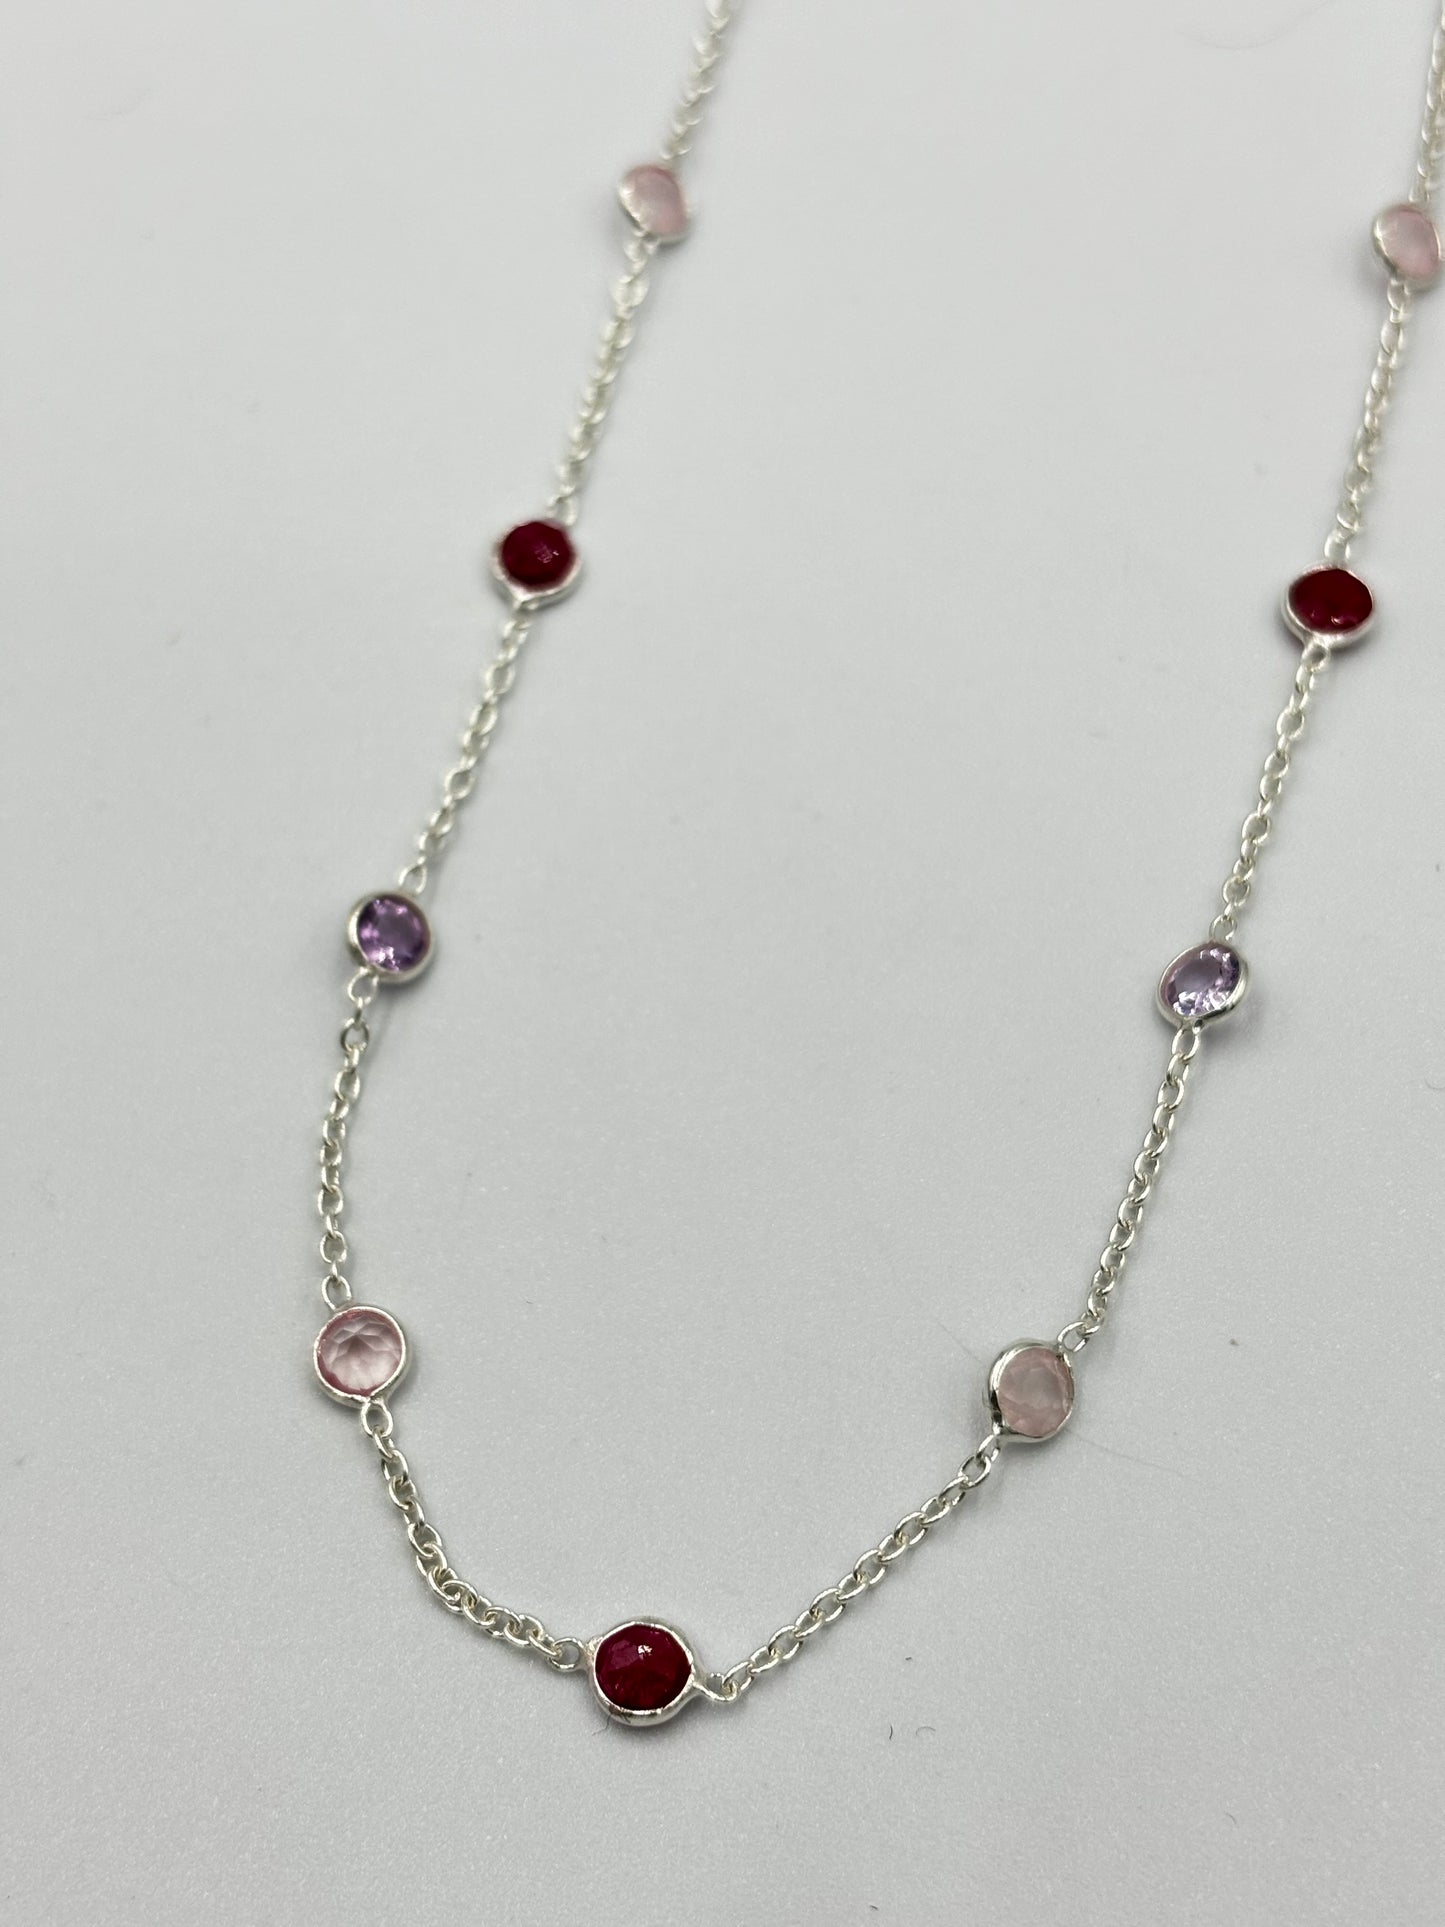 Sterling silver necklace with 5mm Ruby, Rose and Amy semi precious stones in-bedded in chain